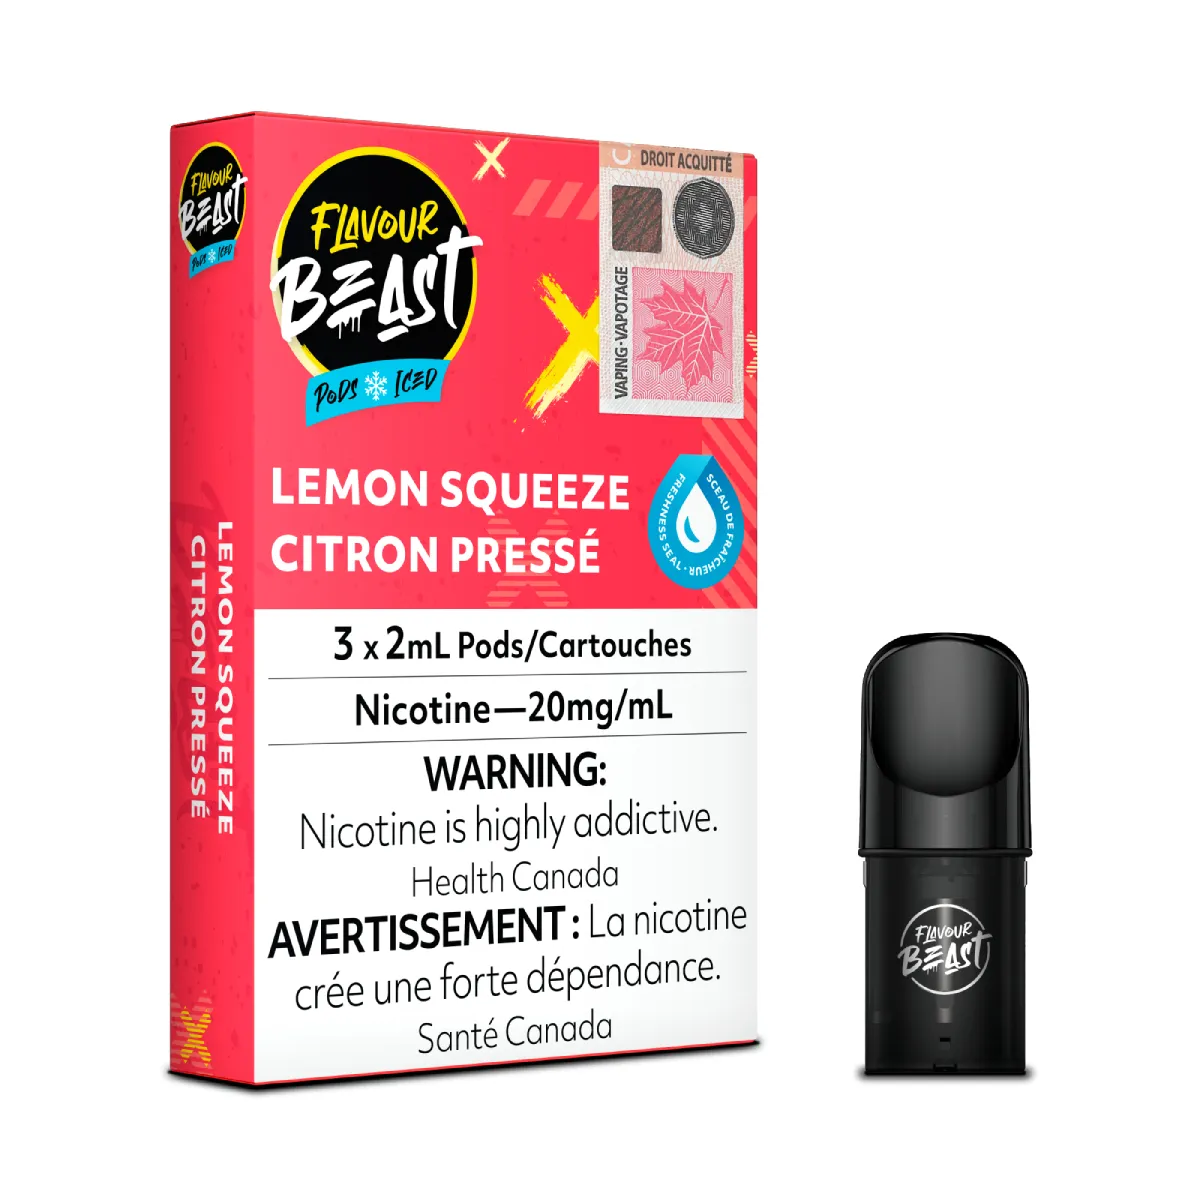 Flavour Beast Pods - Lemon Squeeze Iced (3x2mL) (6757135548471)